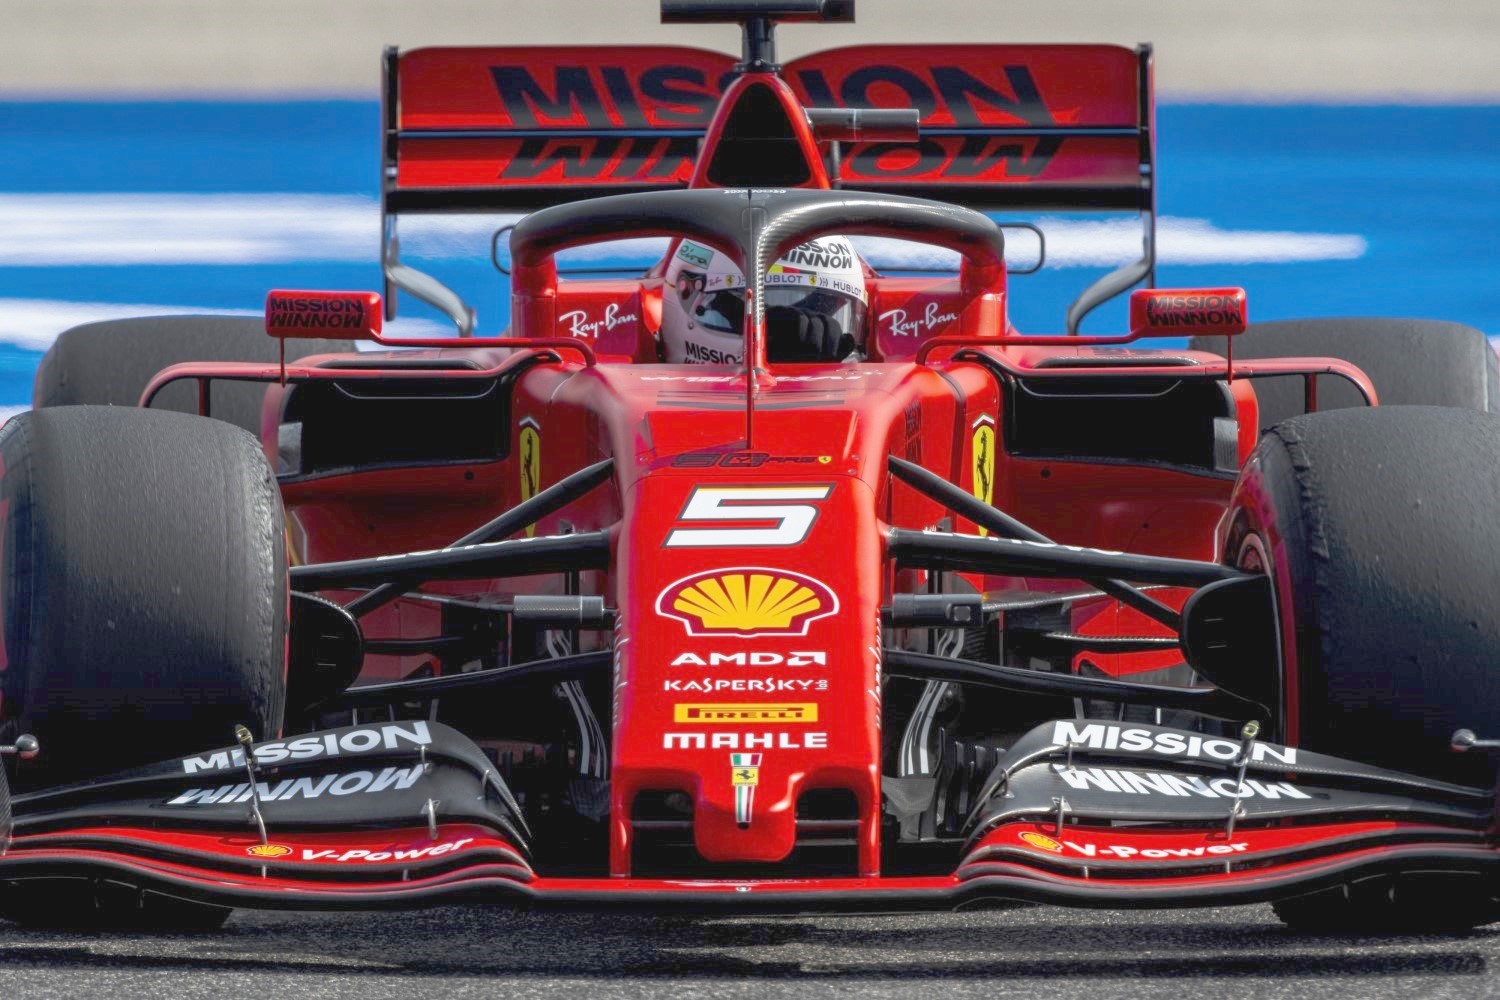 History has proven time and again, and just like we predicted back in 2016 when F1 announced wider tires, overtaking would be come harder. Racing formula with the skinniest tires feature the most overtaking